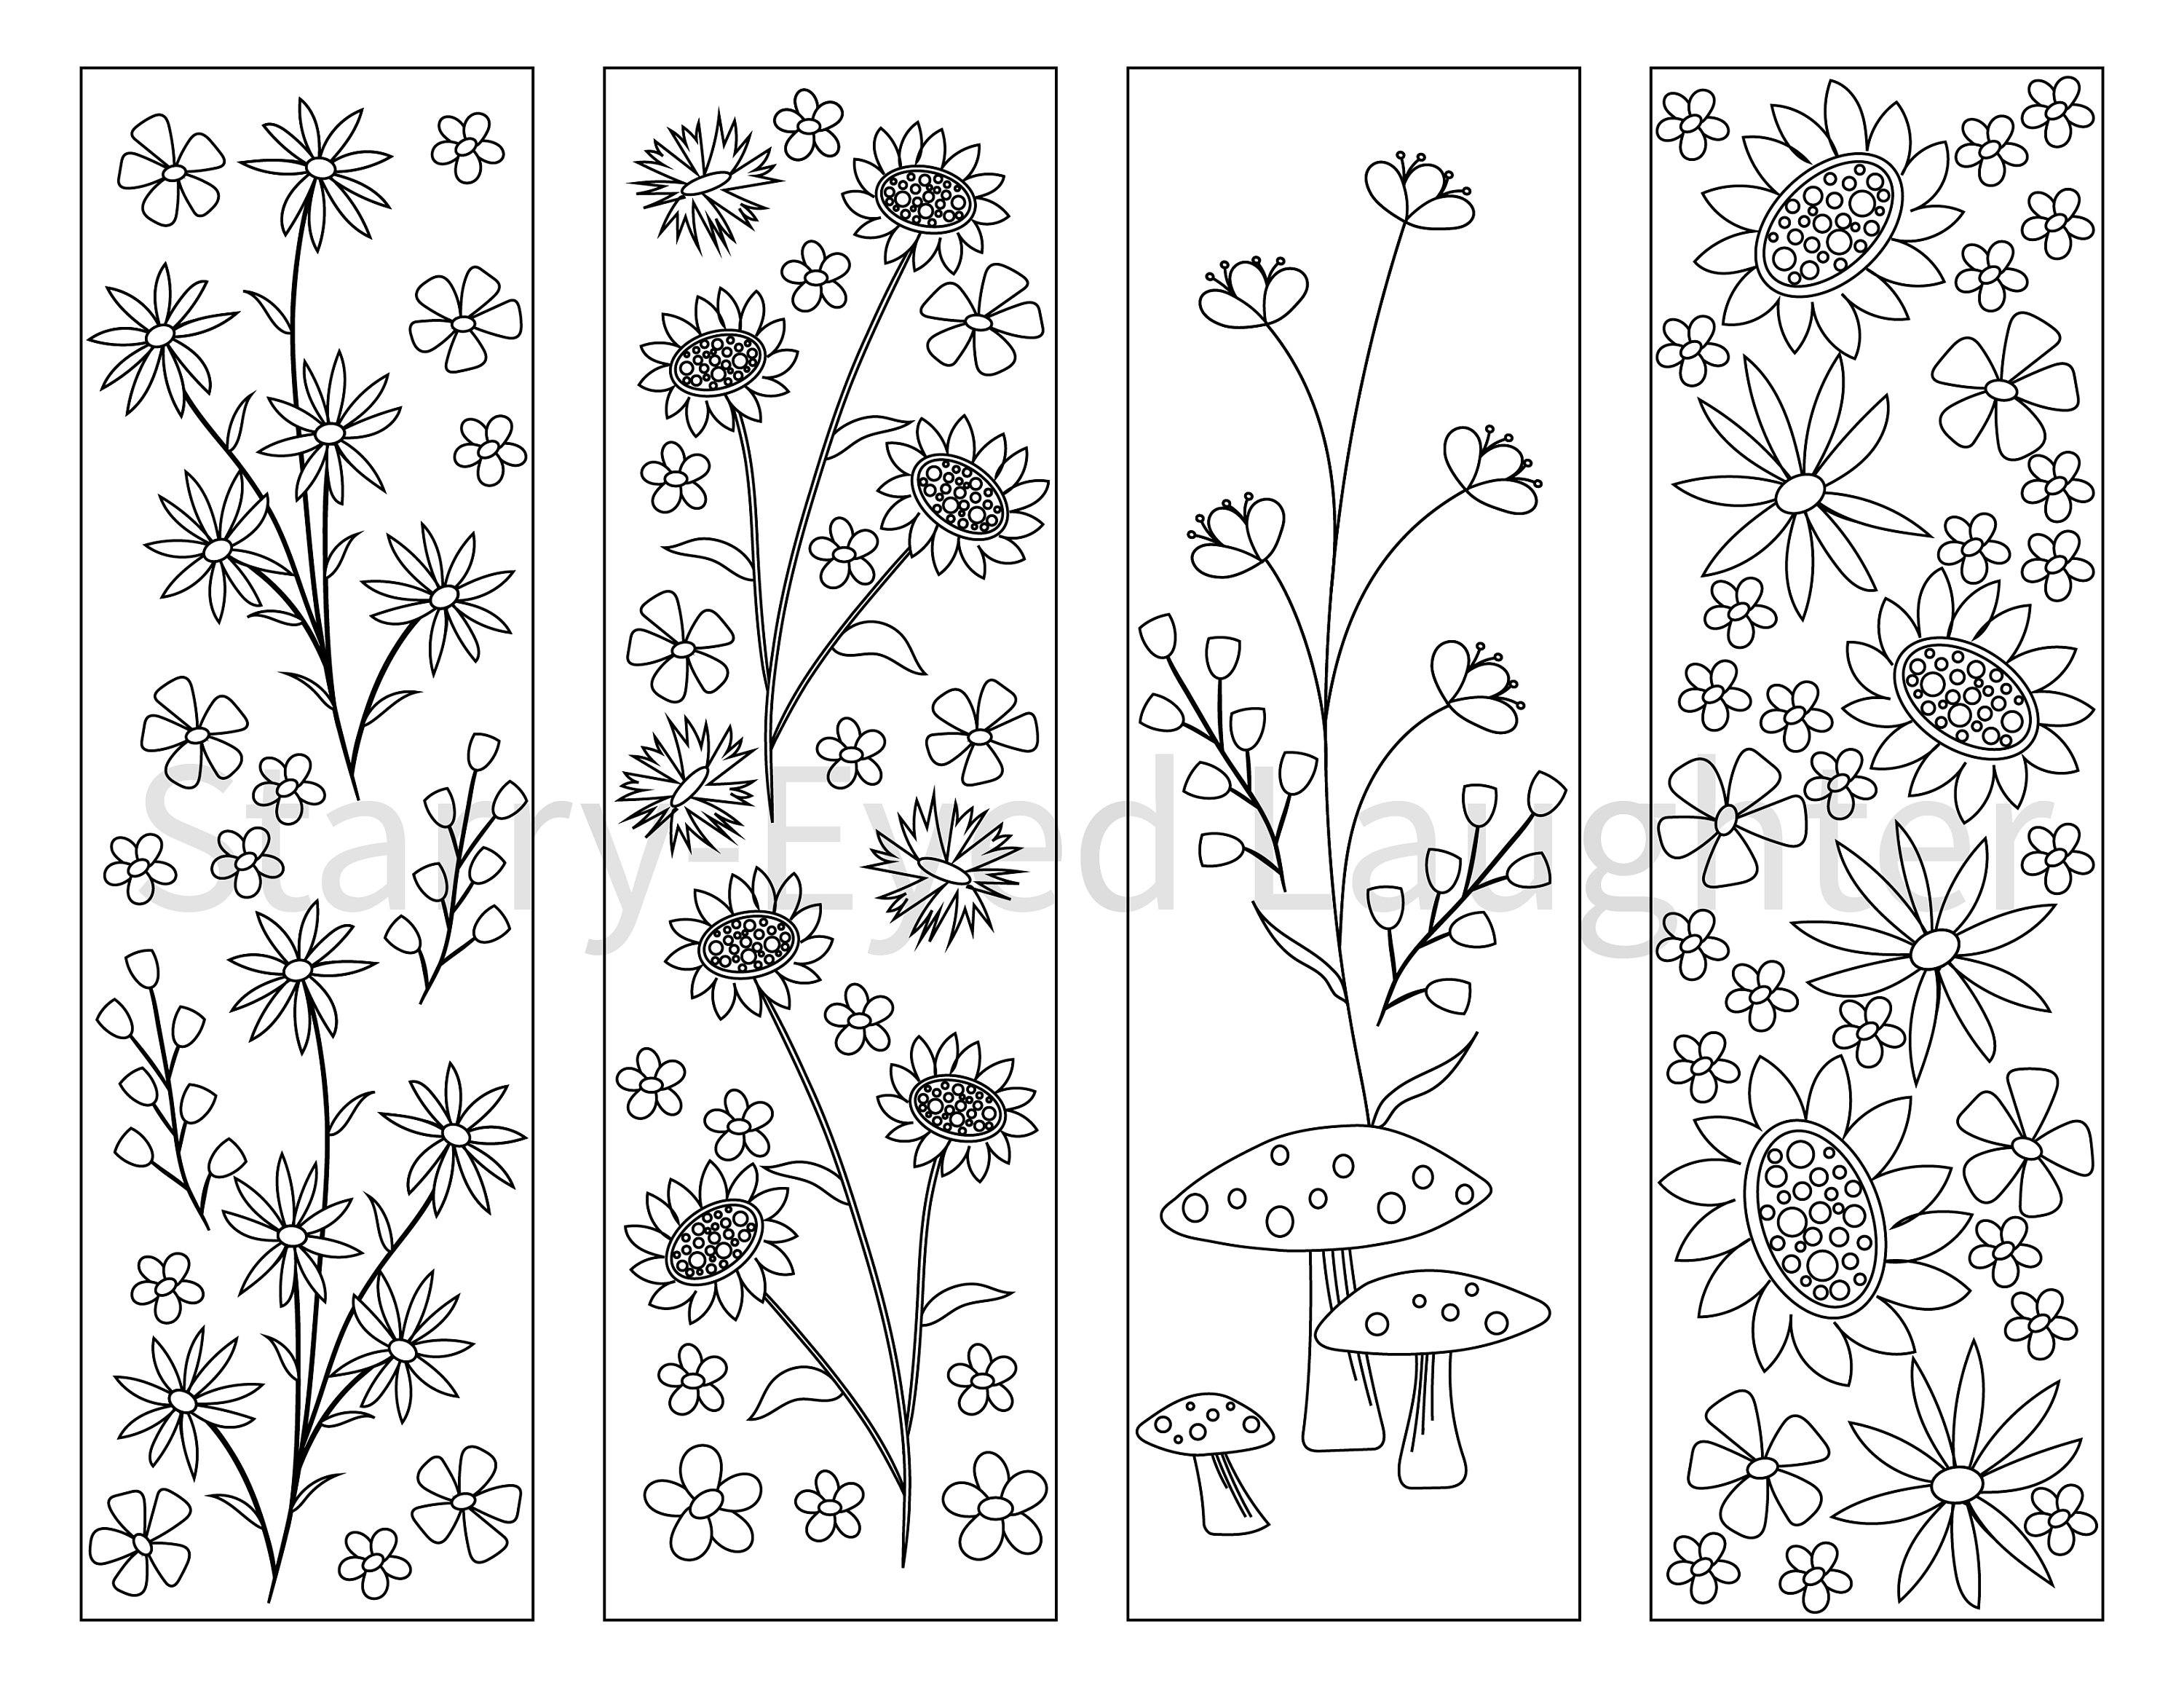 Coloring Bookmarks, Flower Adult Coloring Page PDF, Garden, Mushrooms,  Cottagecore, Therapeutic Self Care Activity, Printable Birthday Gift 